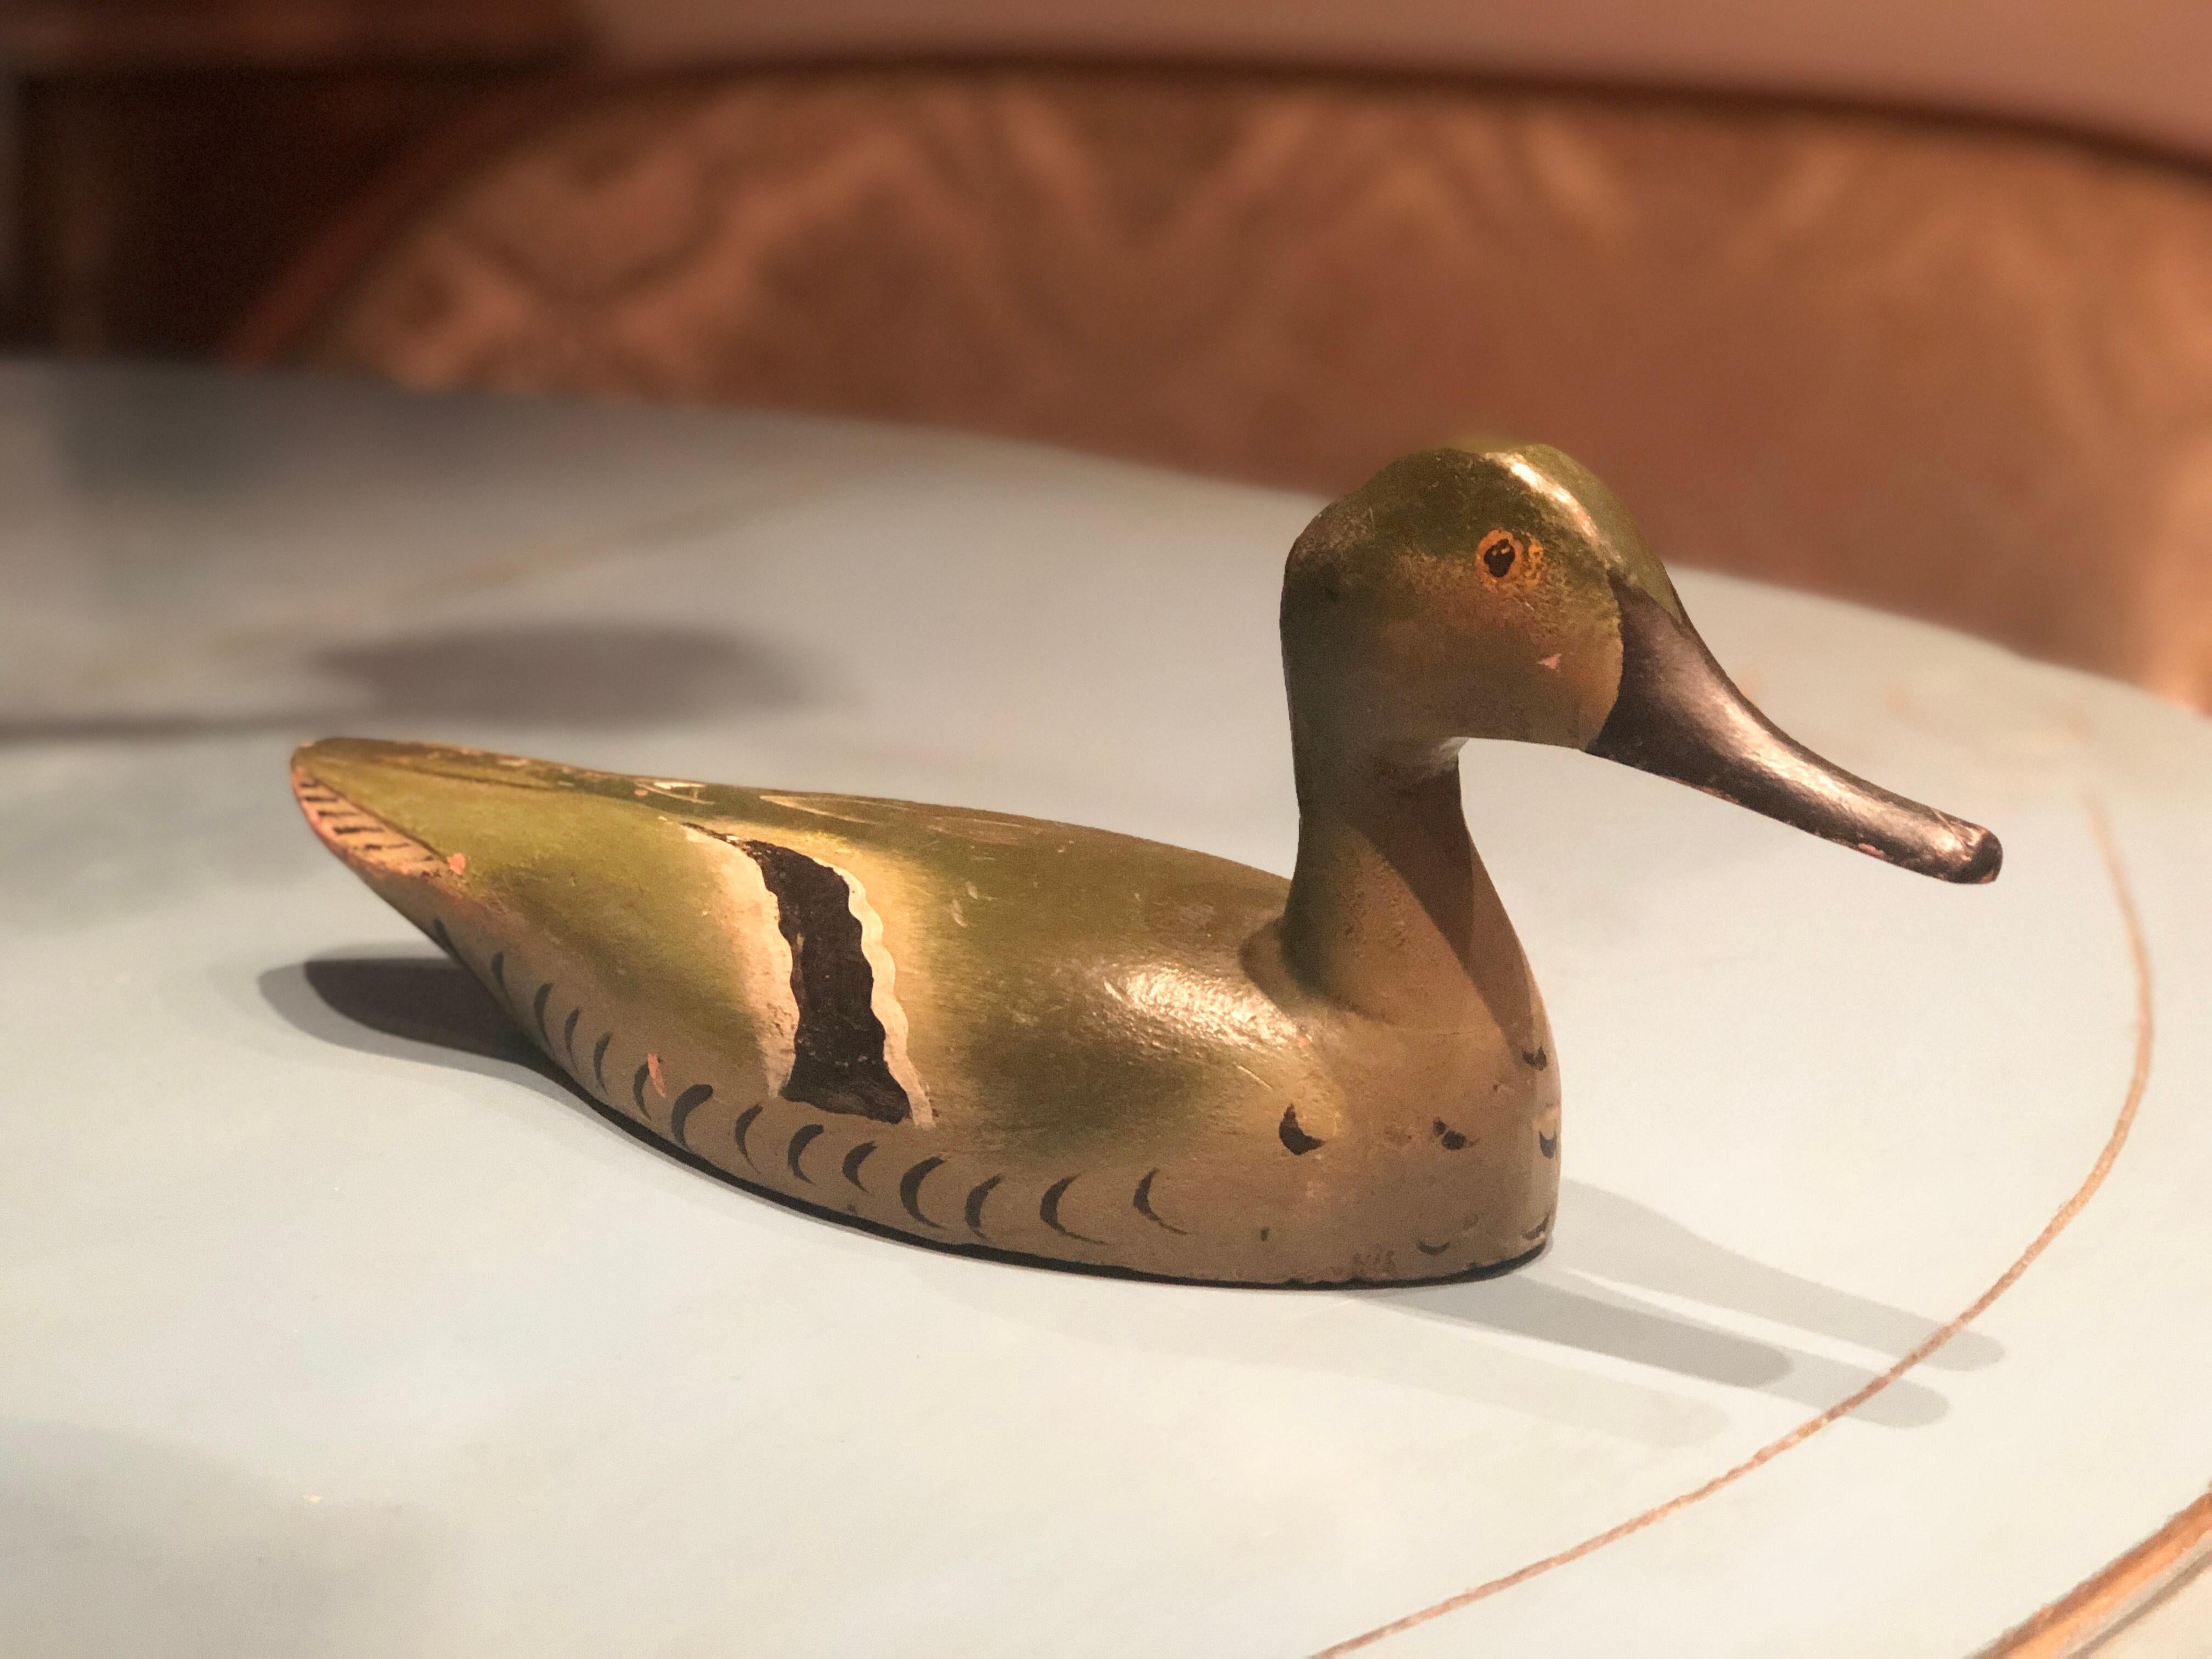 Sculpture of a duck in hand painted wood.
France, circa 1960.